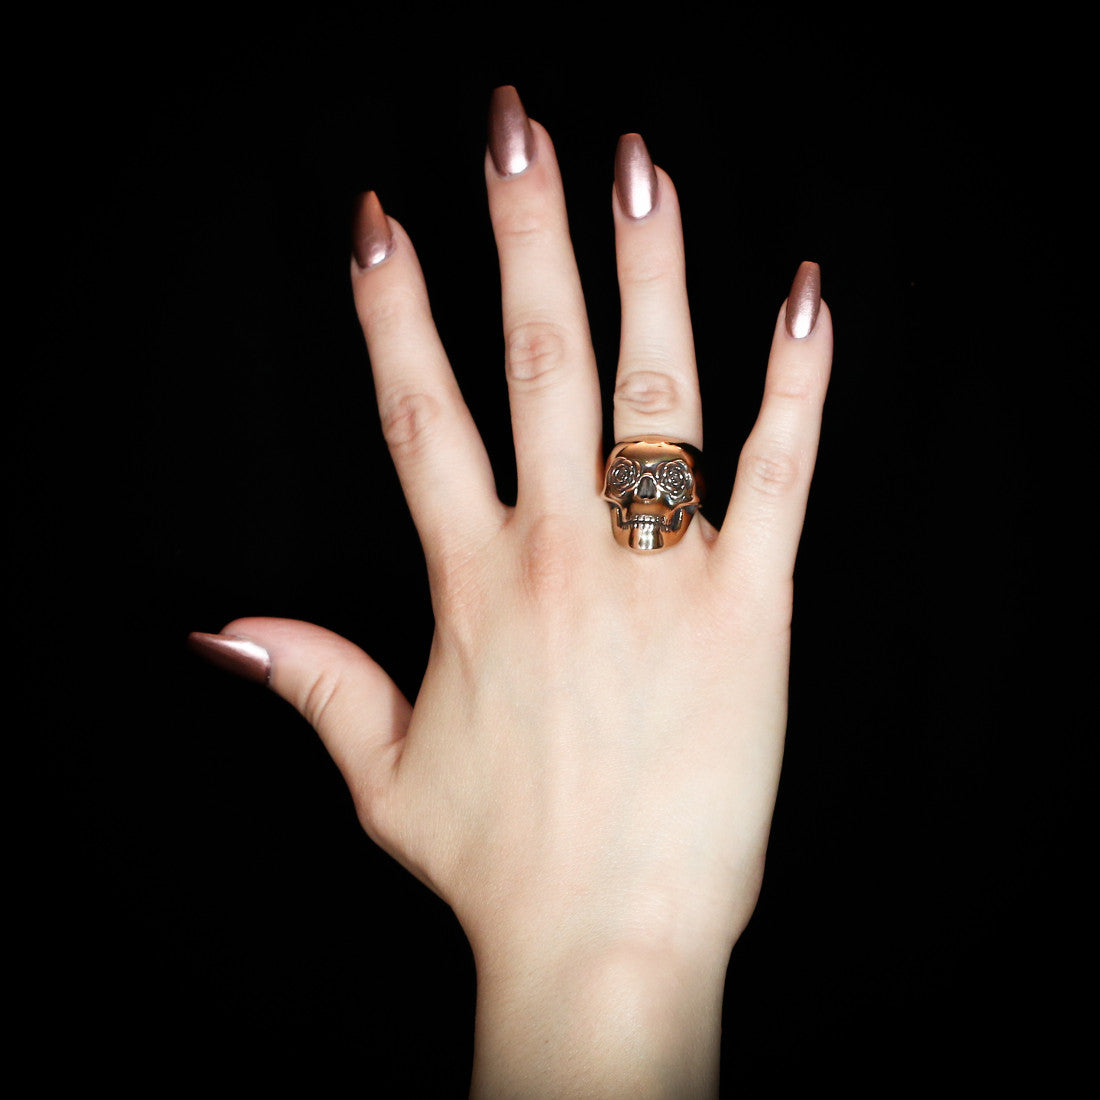 Classic Rose Eye Skull Ring - Brass - Twisted Love NYC